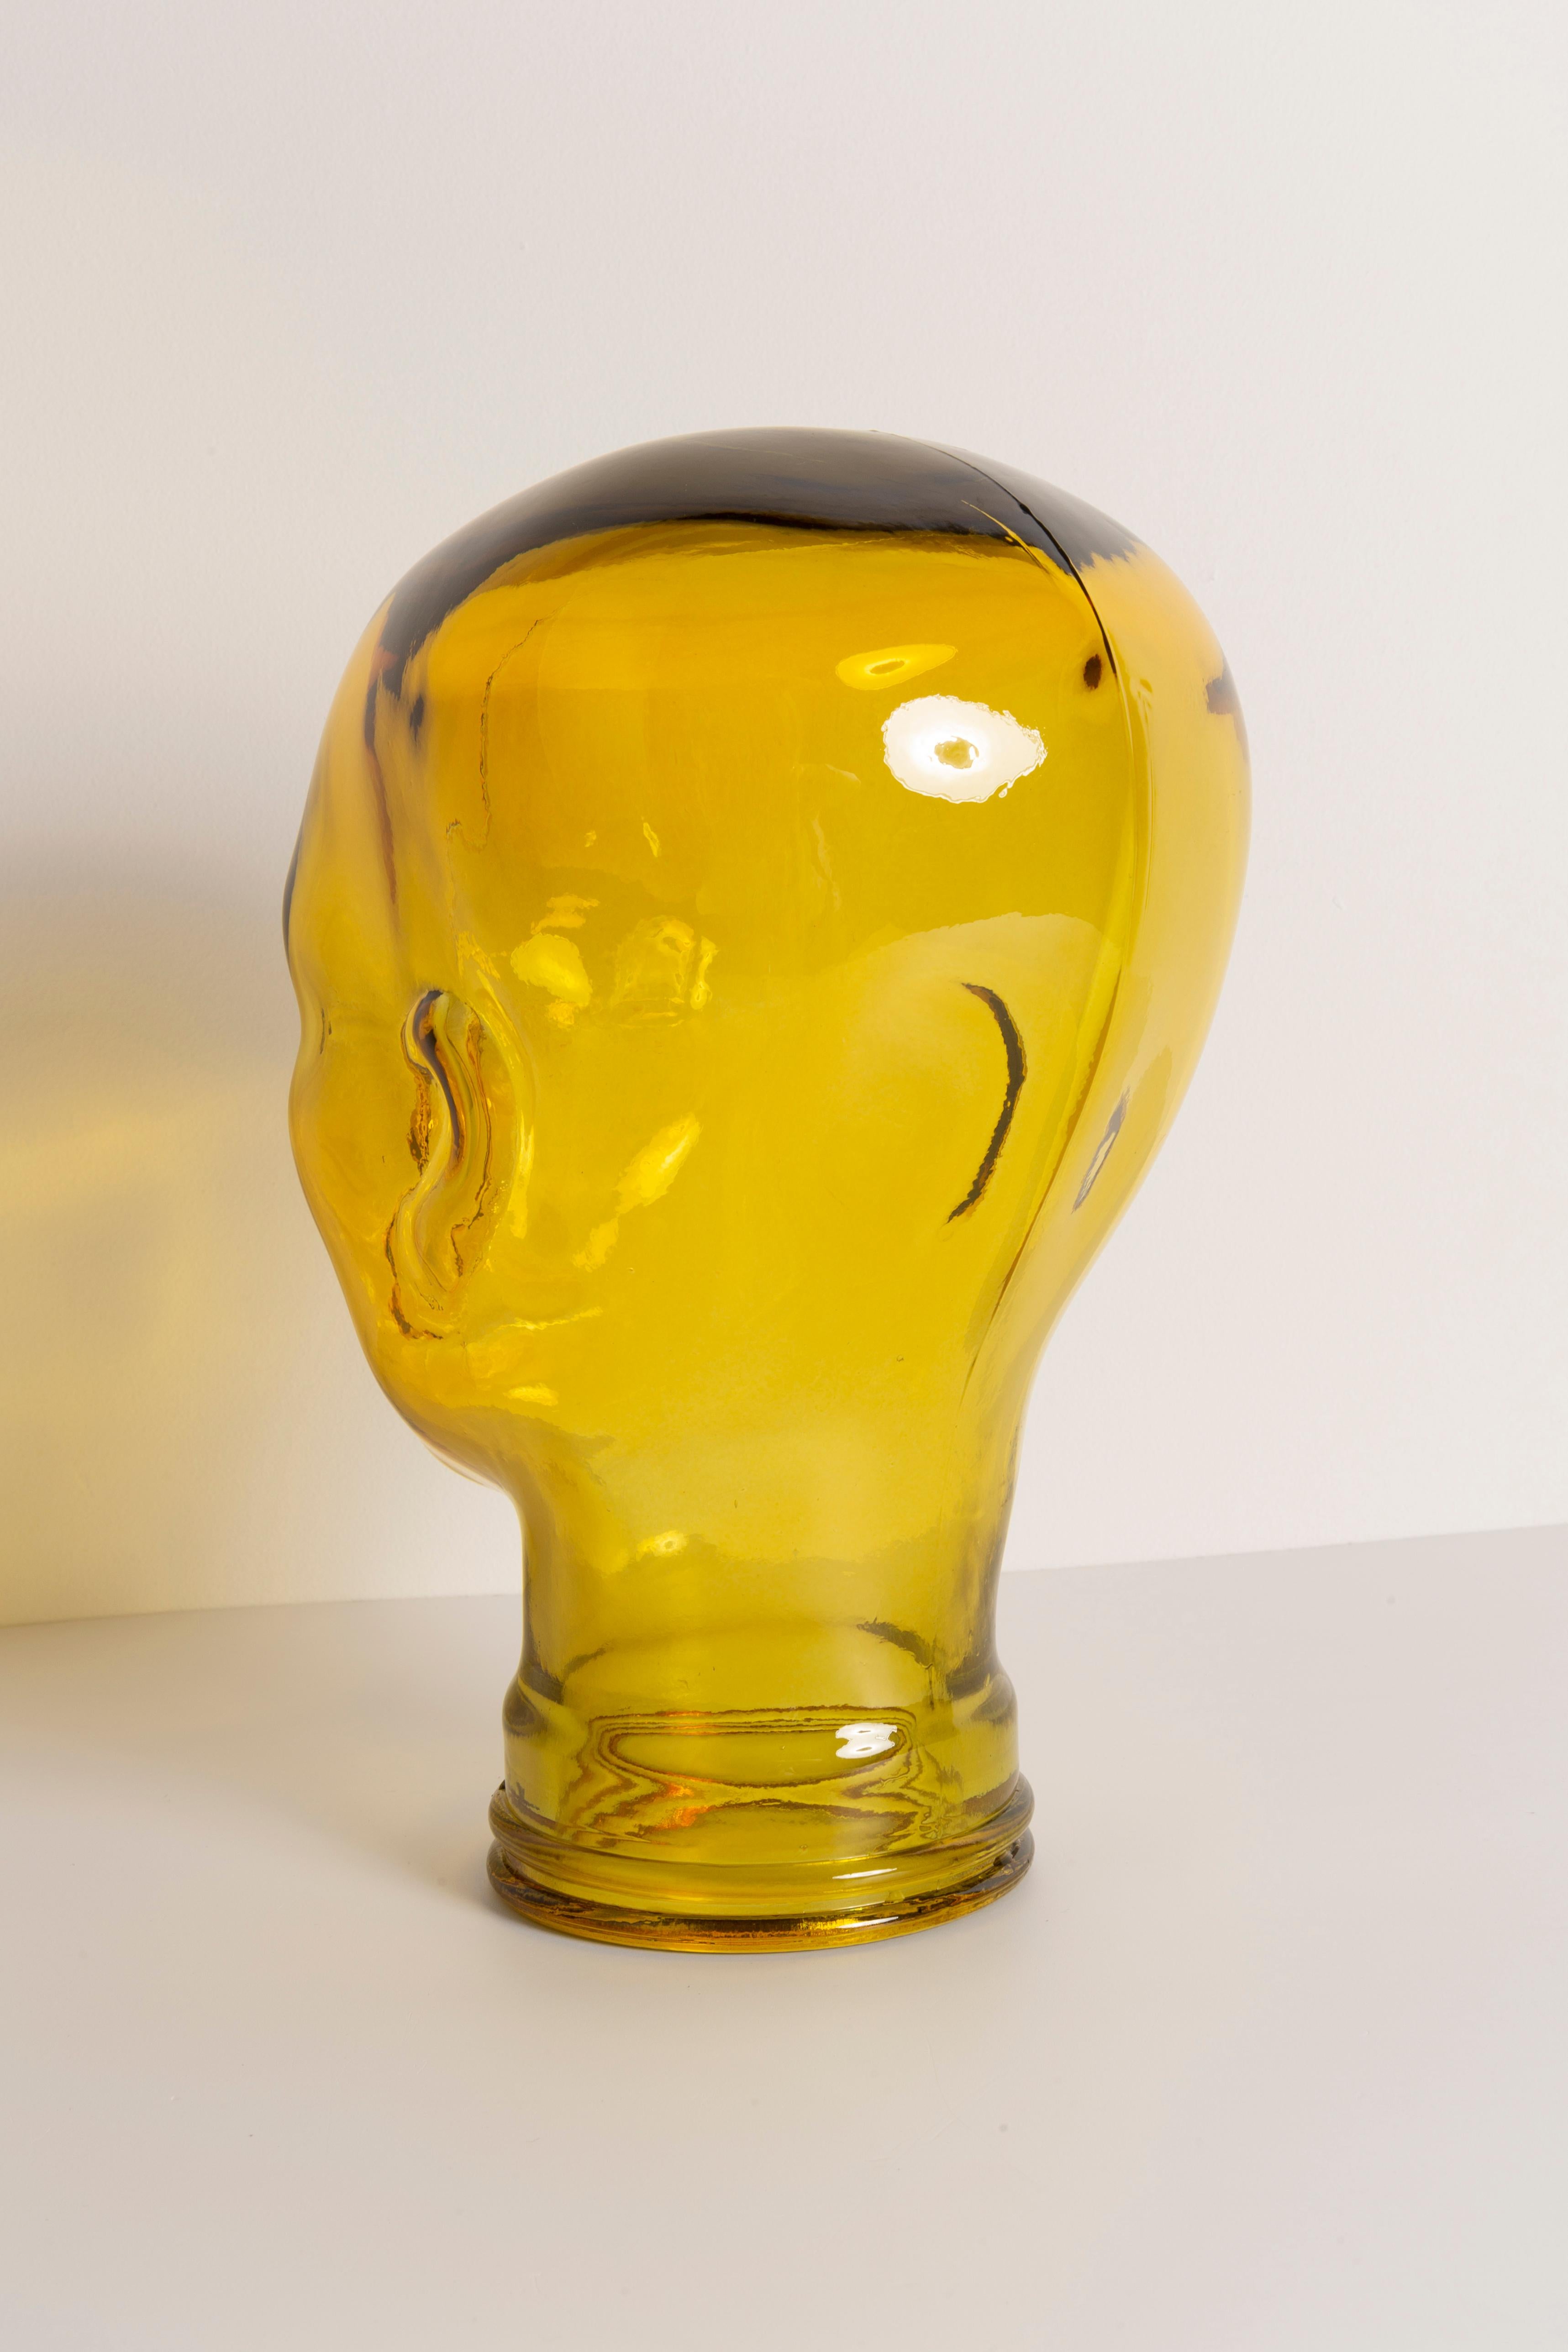 Yellow Vintage Decorative Mannequin Glass Head Sculpture, 1970s, Germany For Sale 1